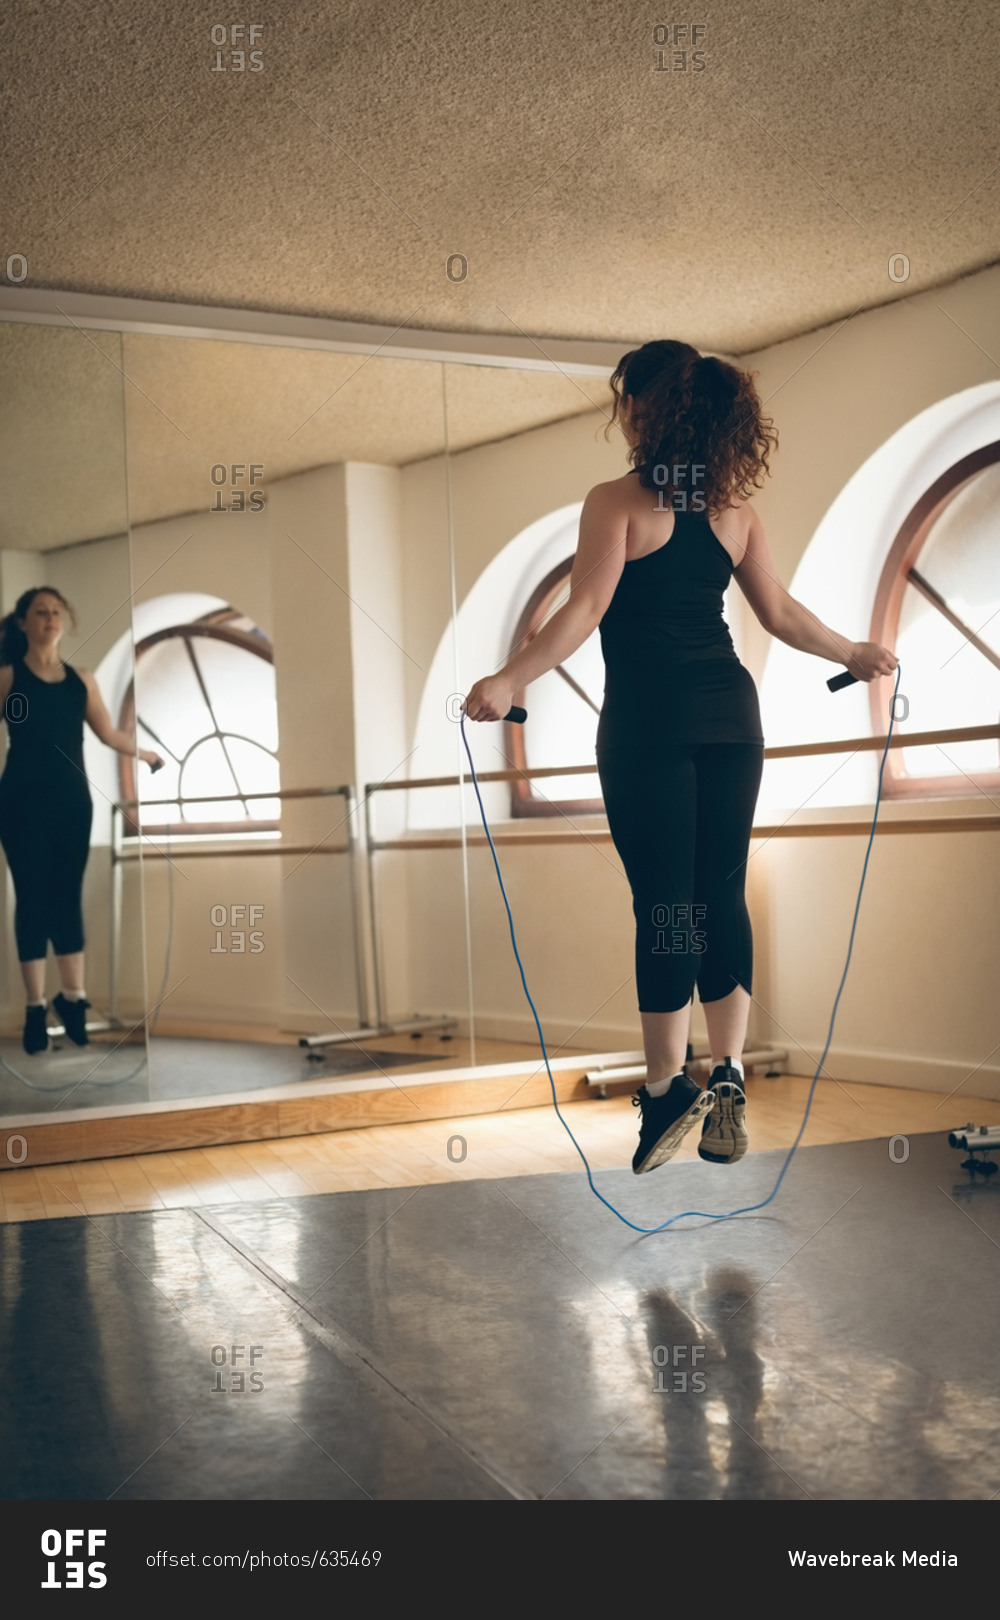 Irish dancer feet jumping with skipping rope in the studio